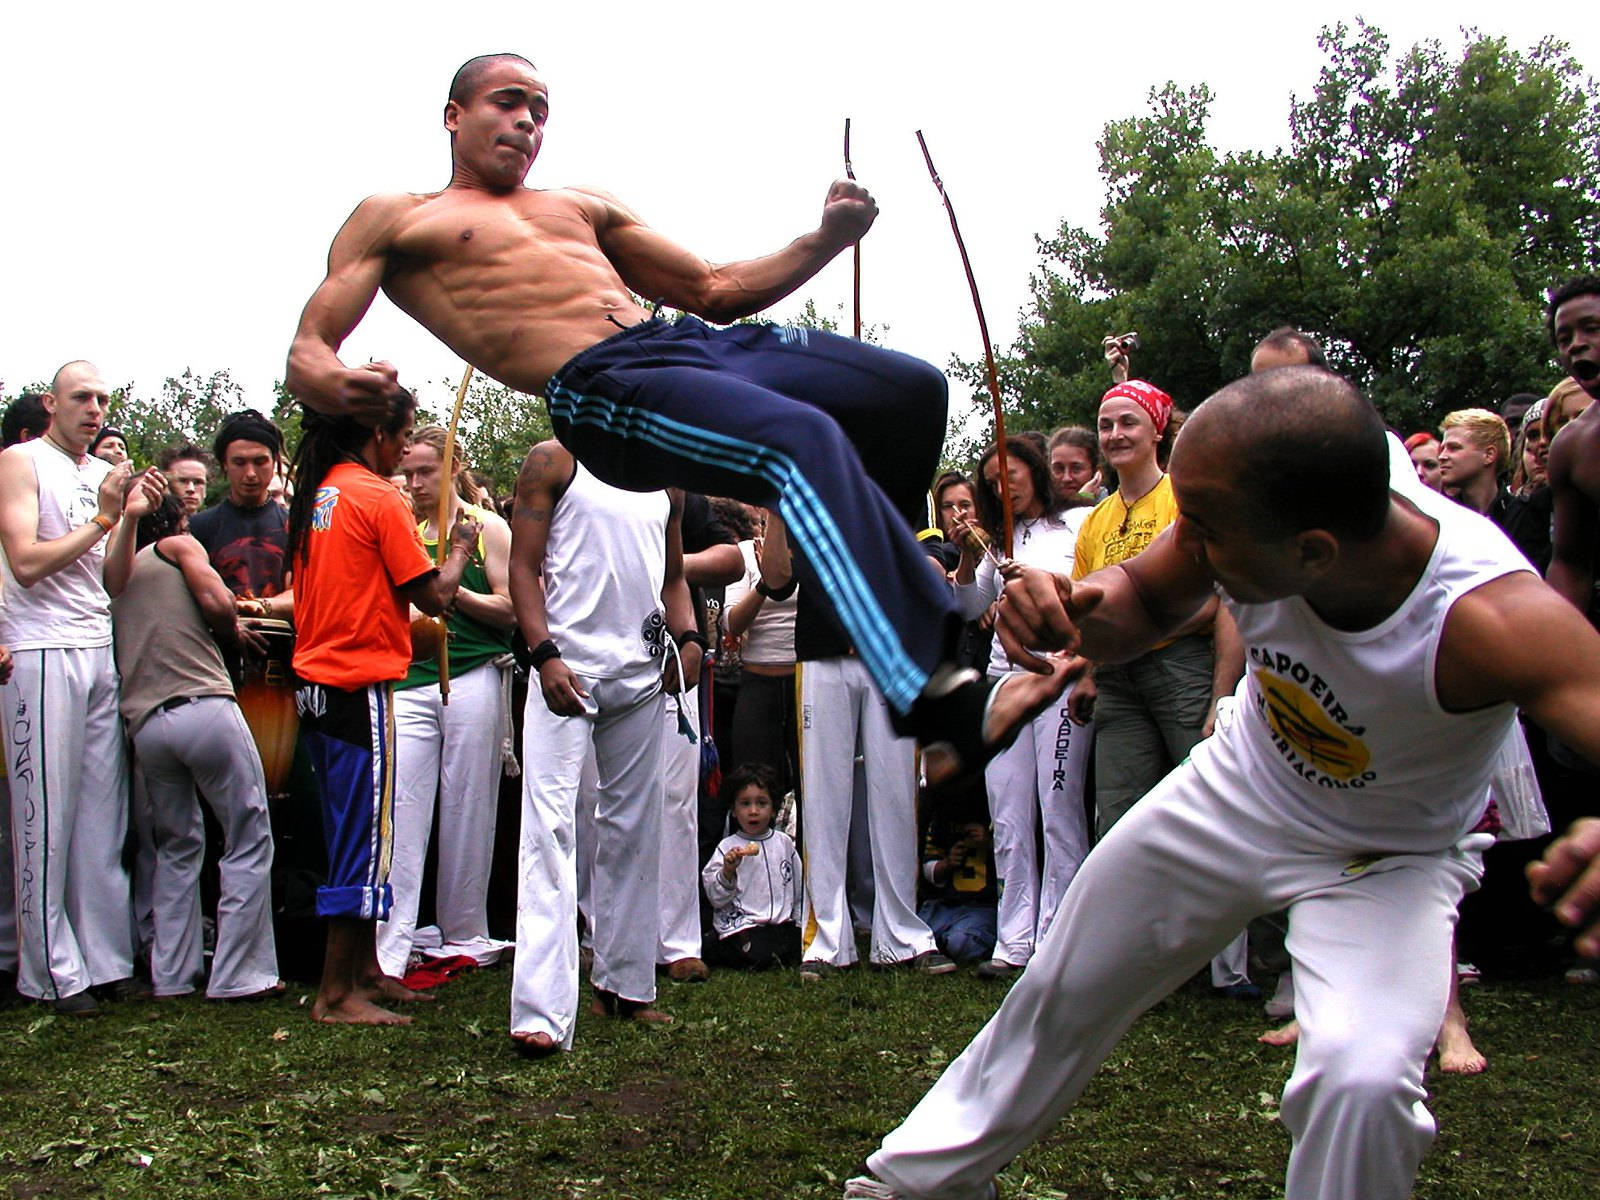 Captivating Capoeira Performance in the Park Wallpaper